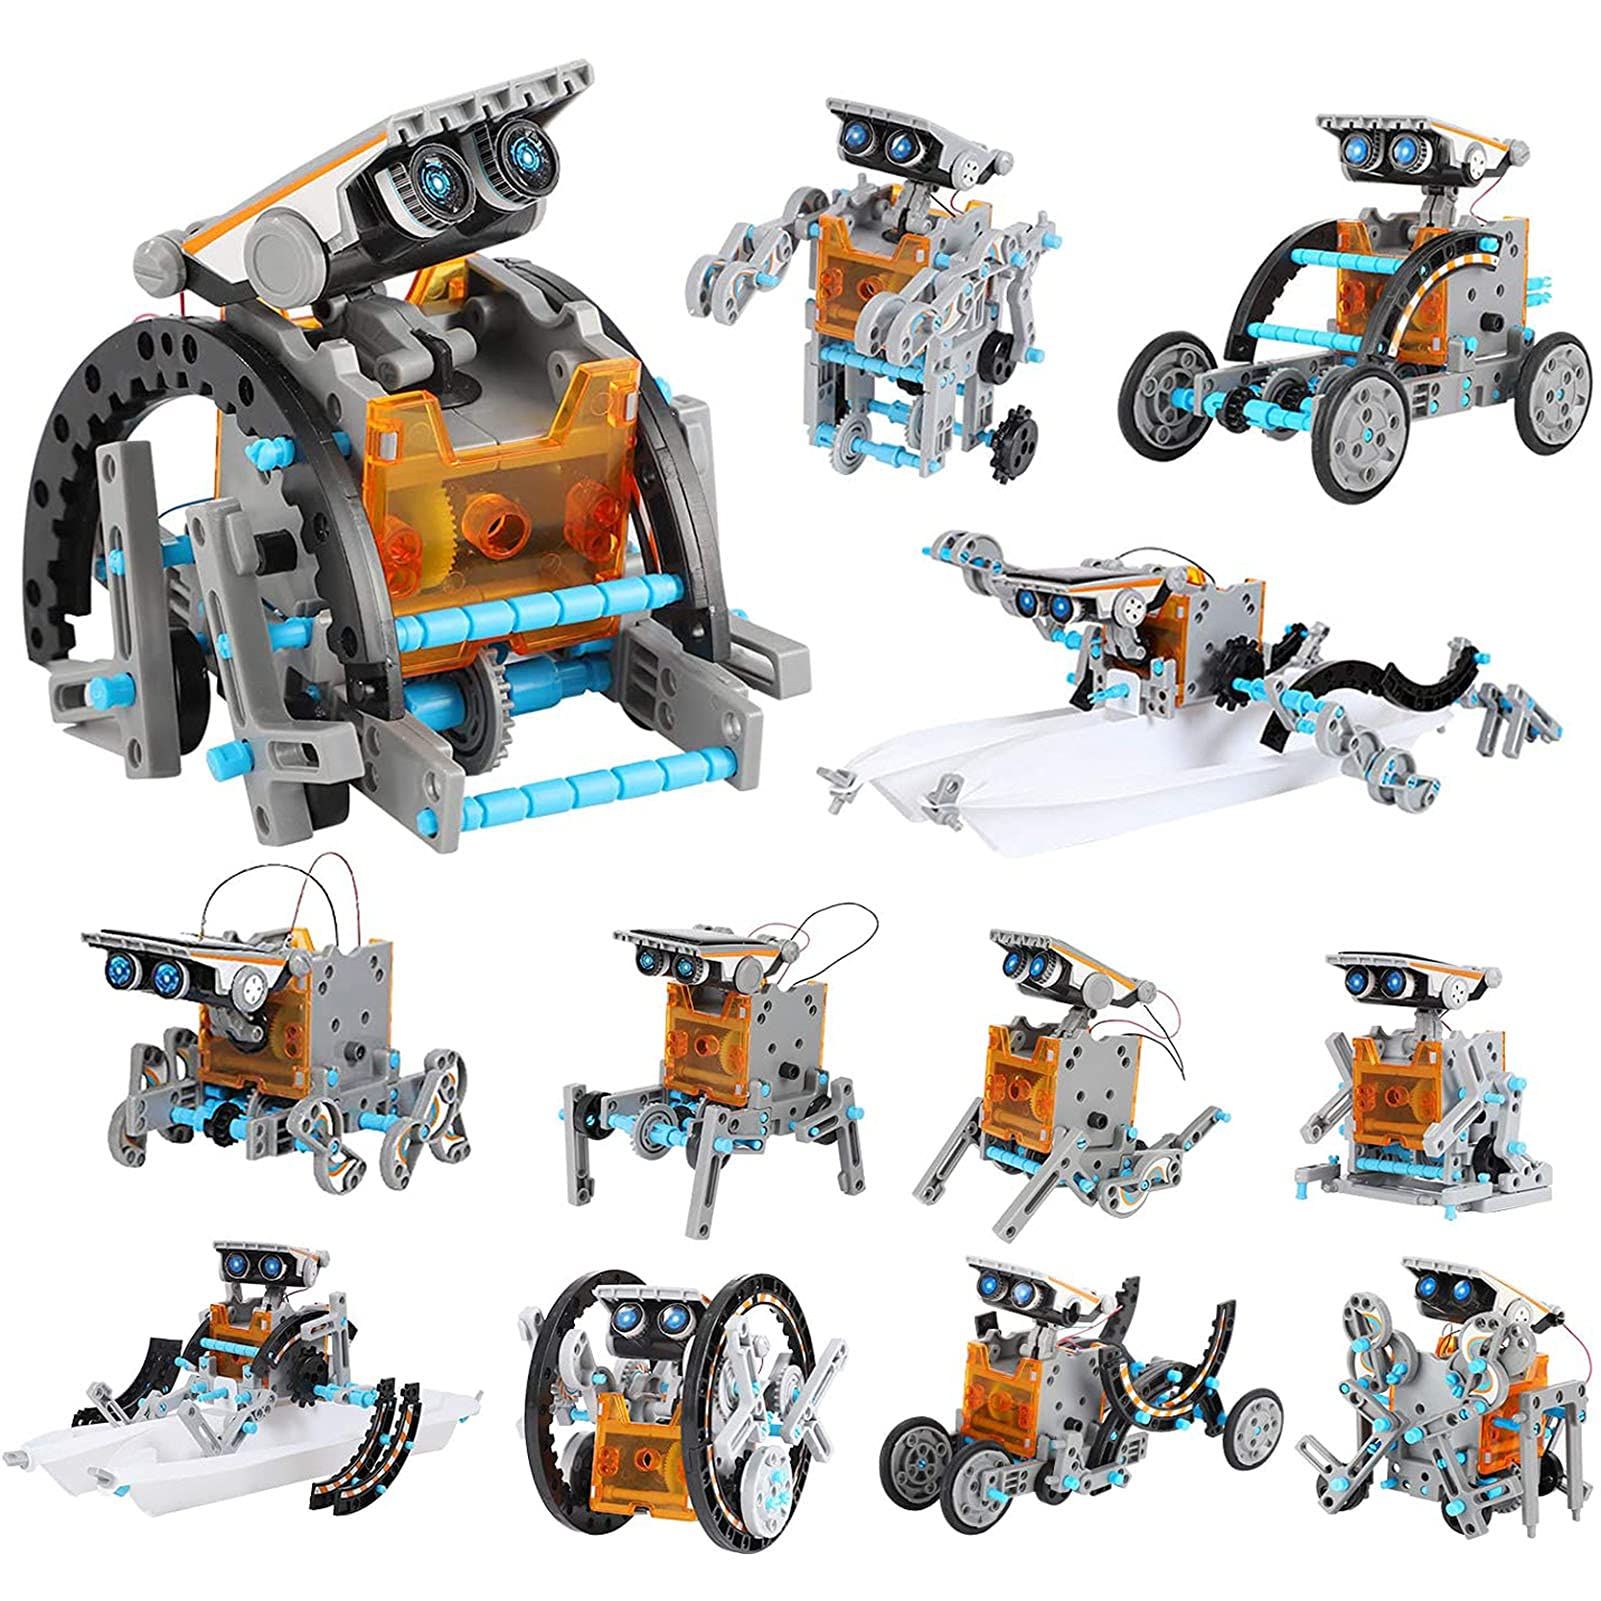 12-in-1 STEM Solar Robot Kit Toys Gifts Educational Building Science  Experiment Set Gifts for Kids Boys Girls - Crazy Sales